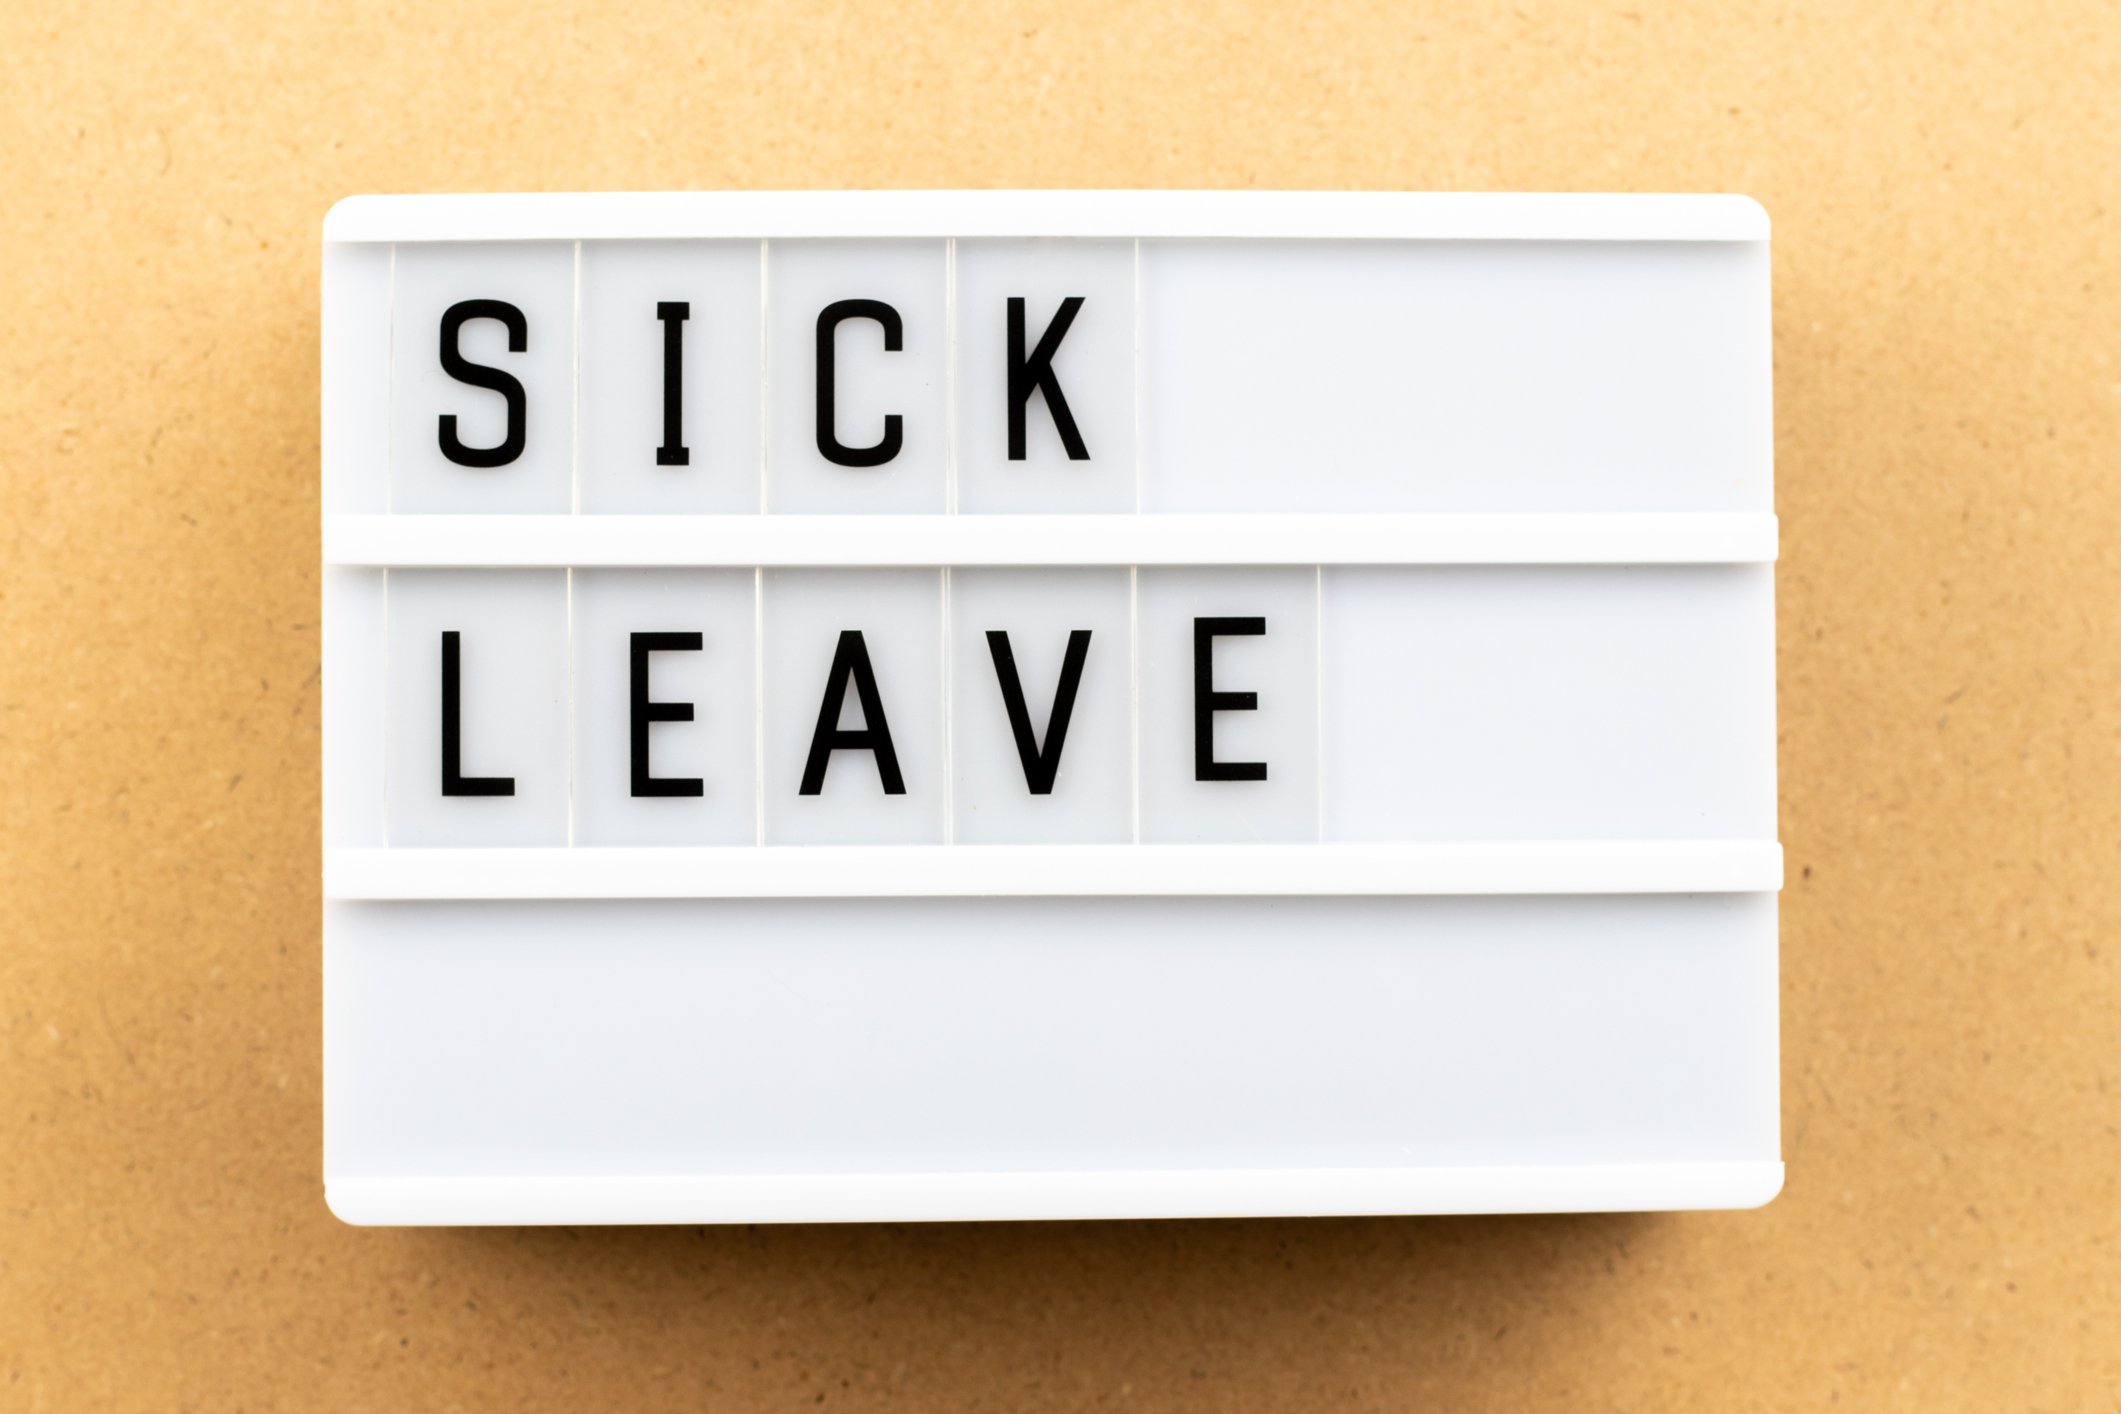 Do you want to reduce sick leave - here are five tips